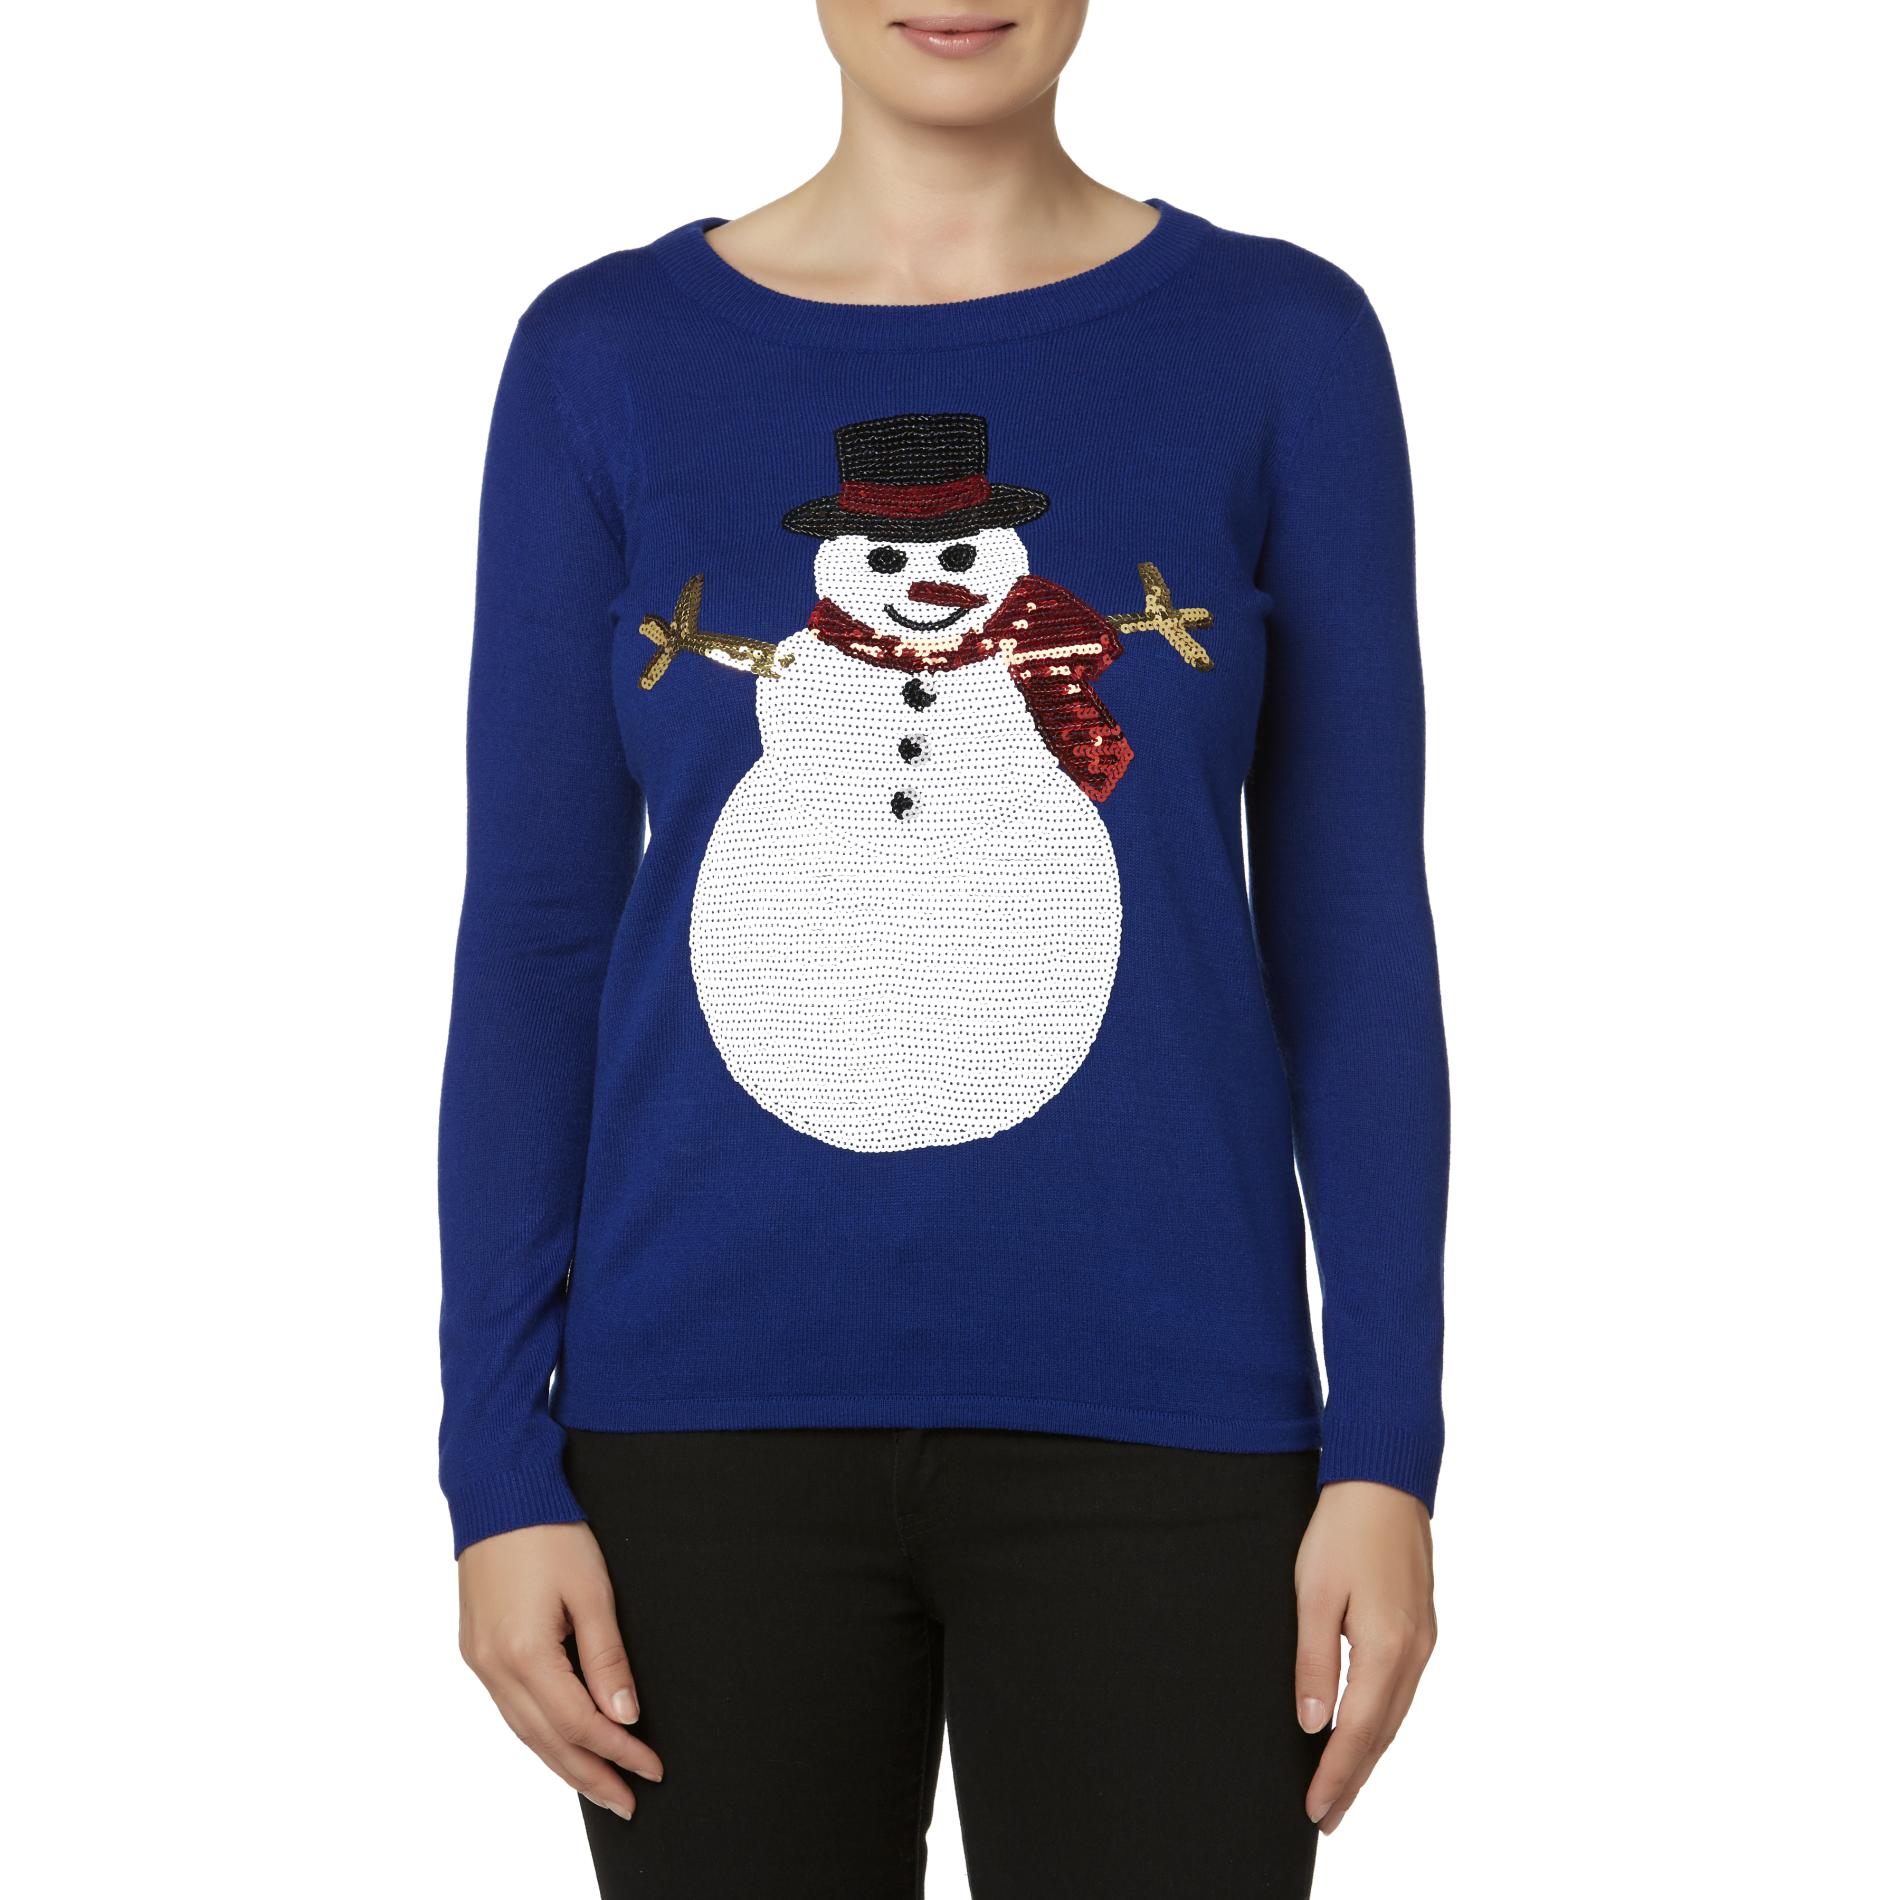 Holiday Editions Women's Christmas Sweater - Snowman